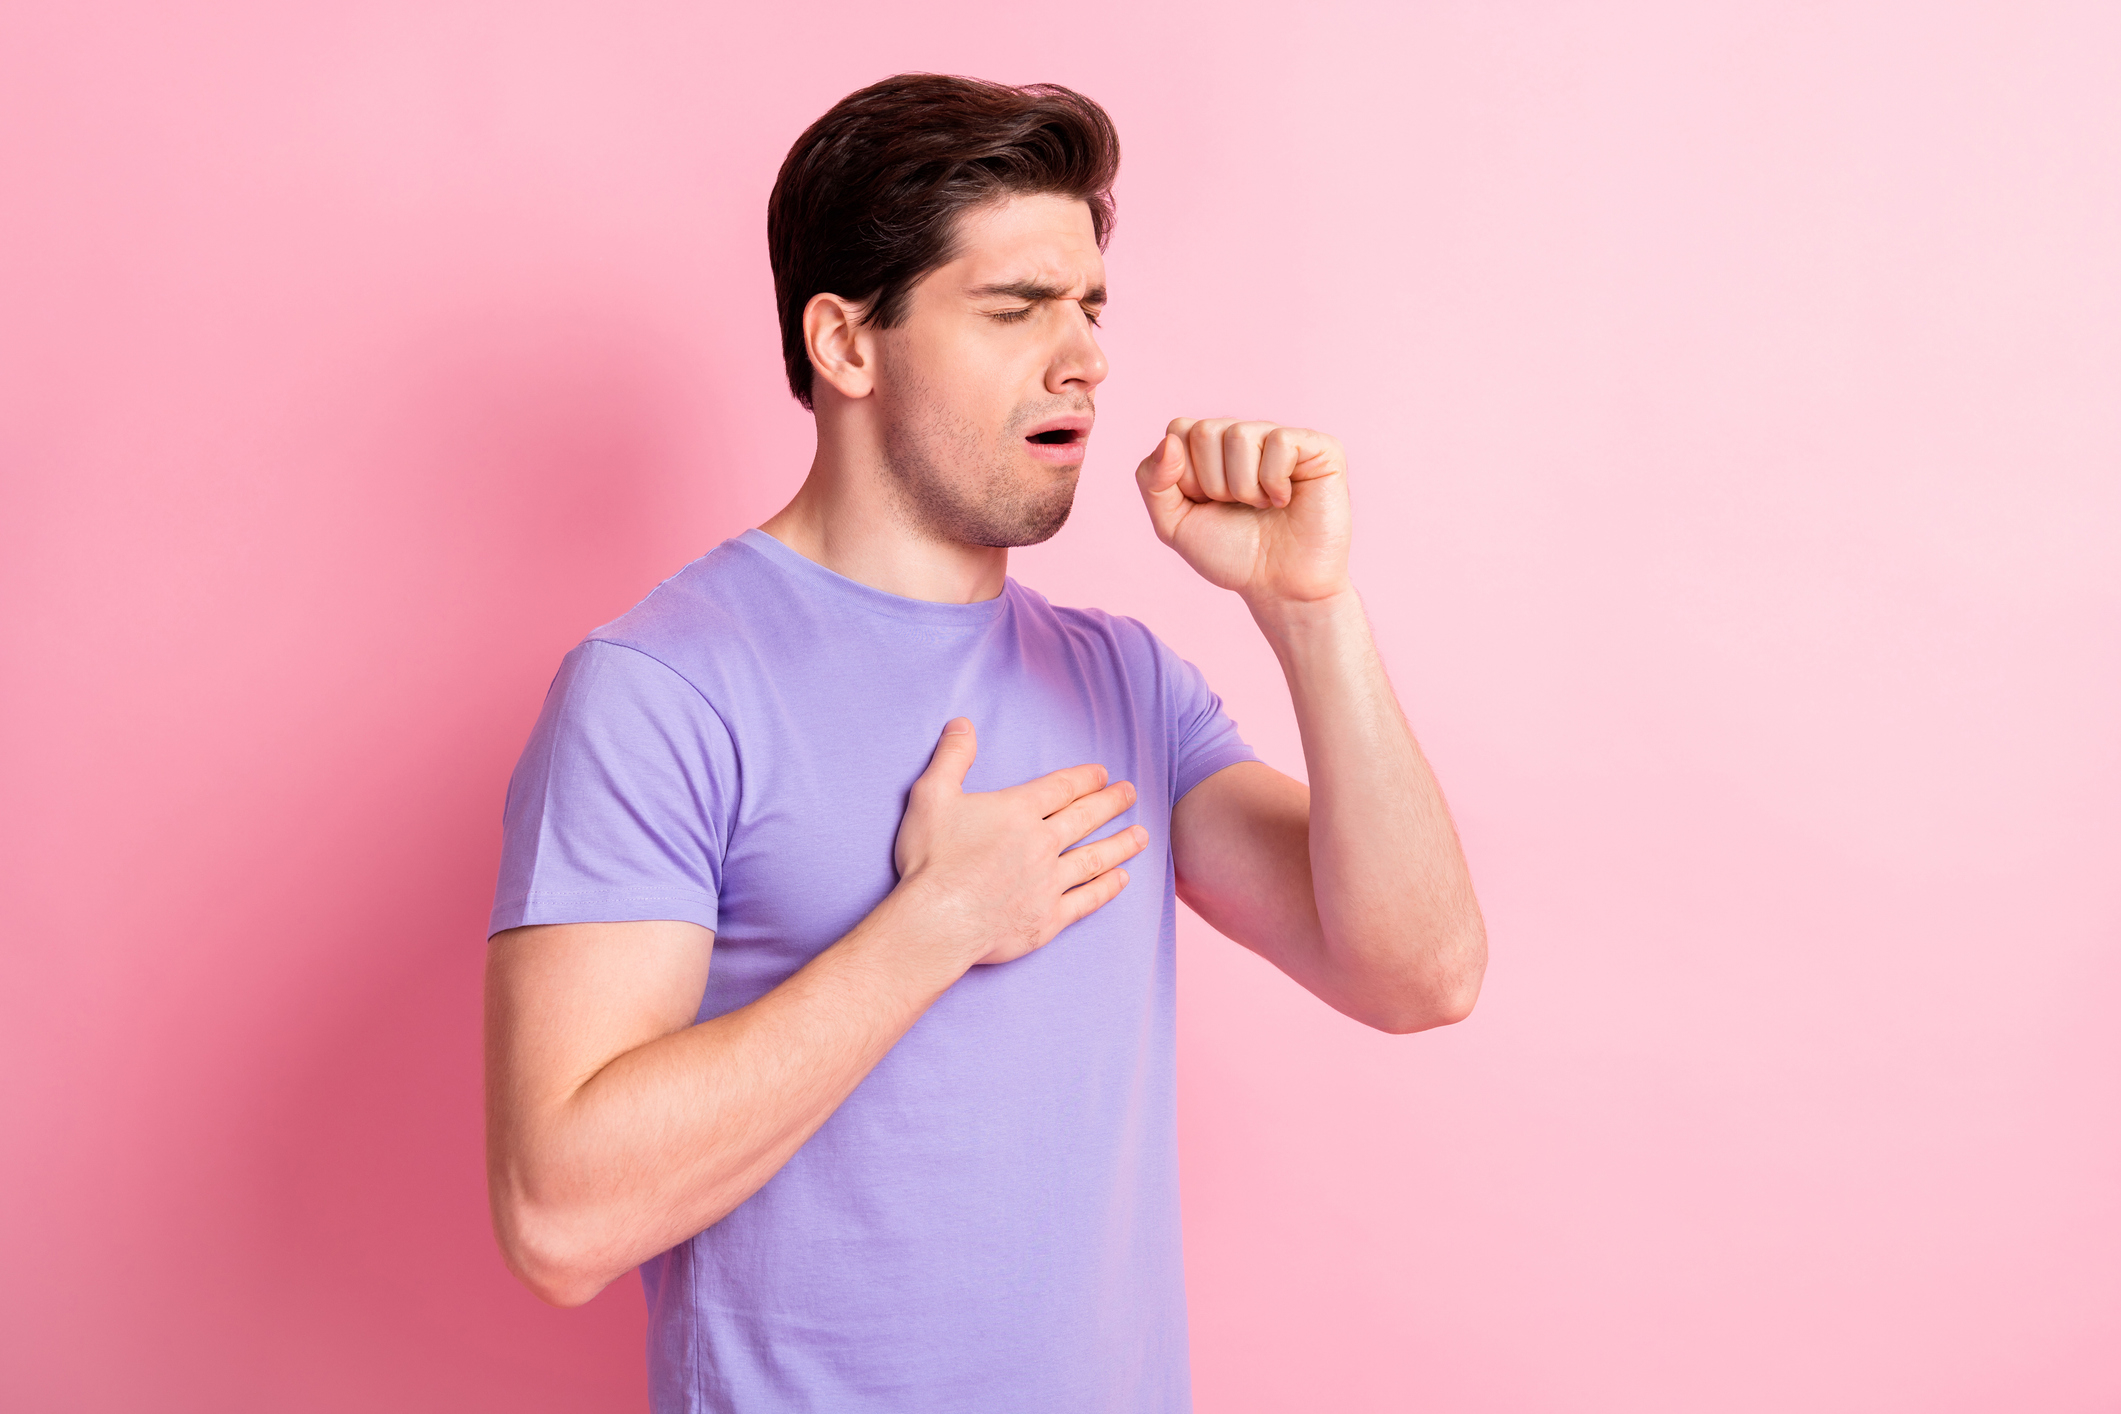 Man in purple T-shirt coughing into fist, appears to be demonstrating proper cough etiquette